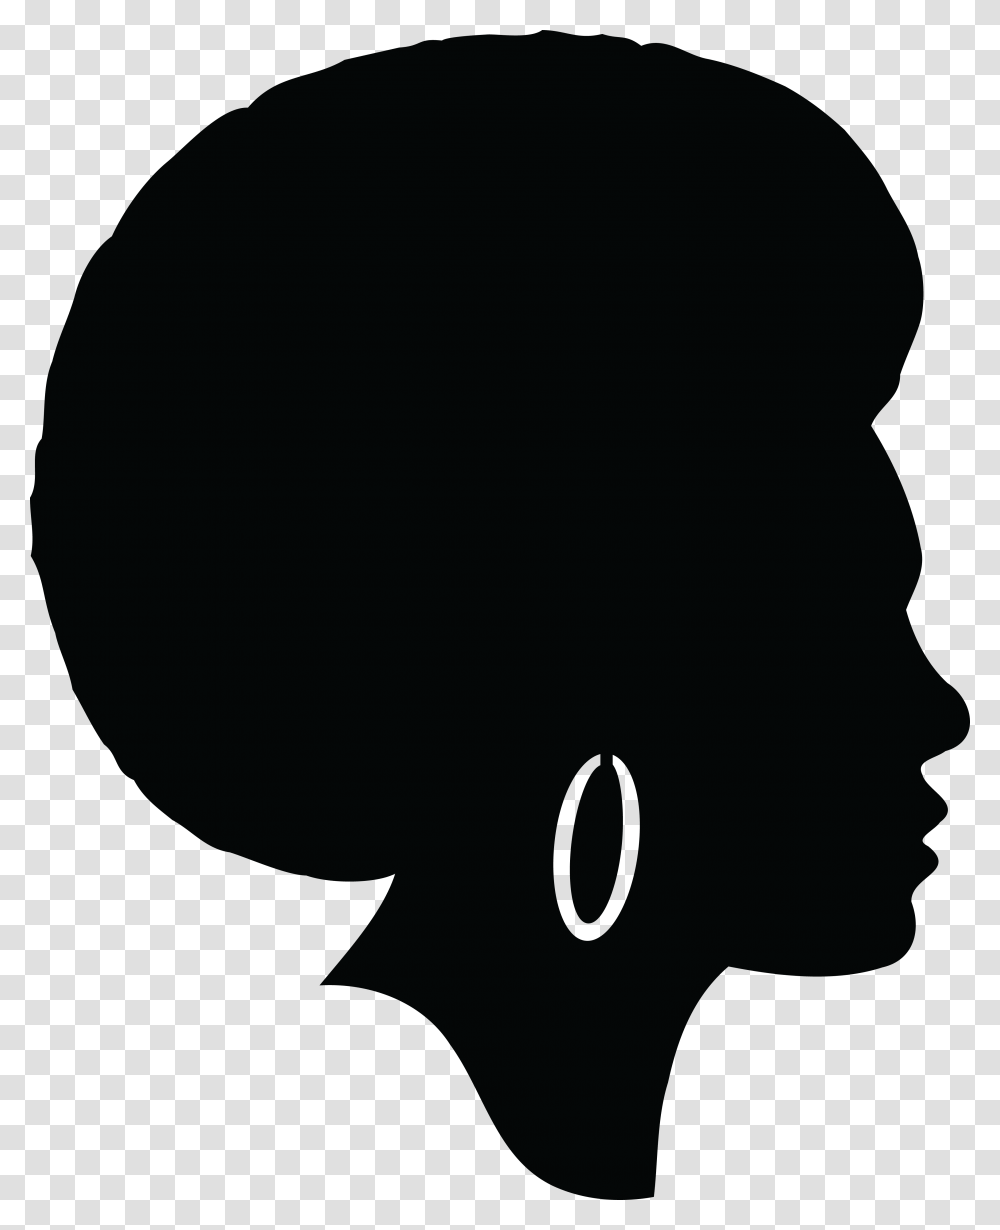 Stylized Woman Silhouette Svg Clip Arts Silhouette Of A Black Woman ...